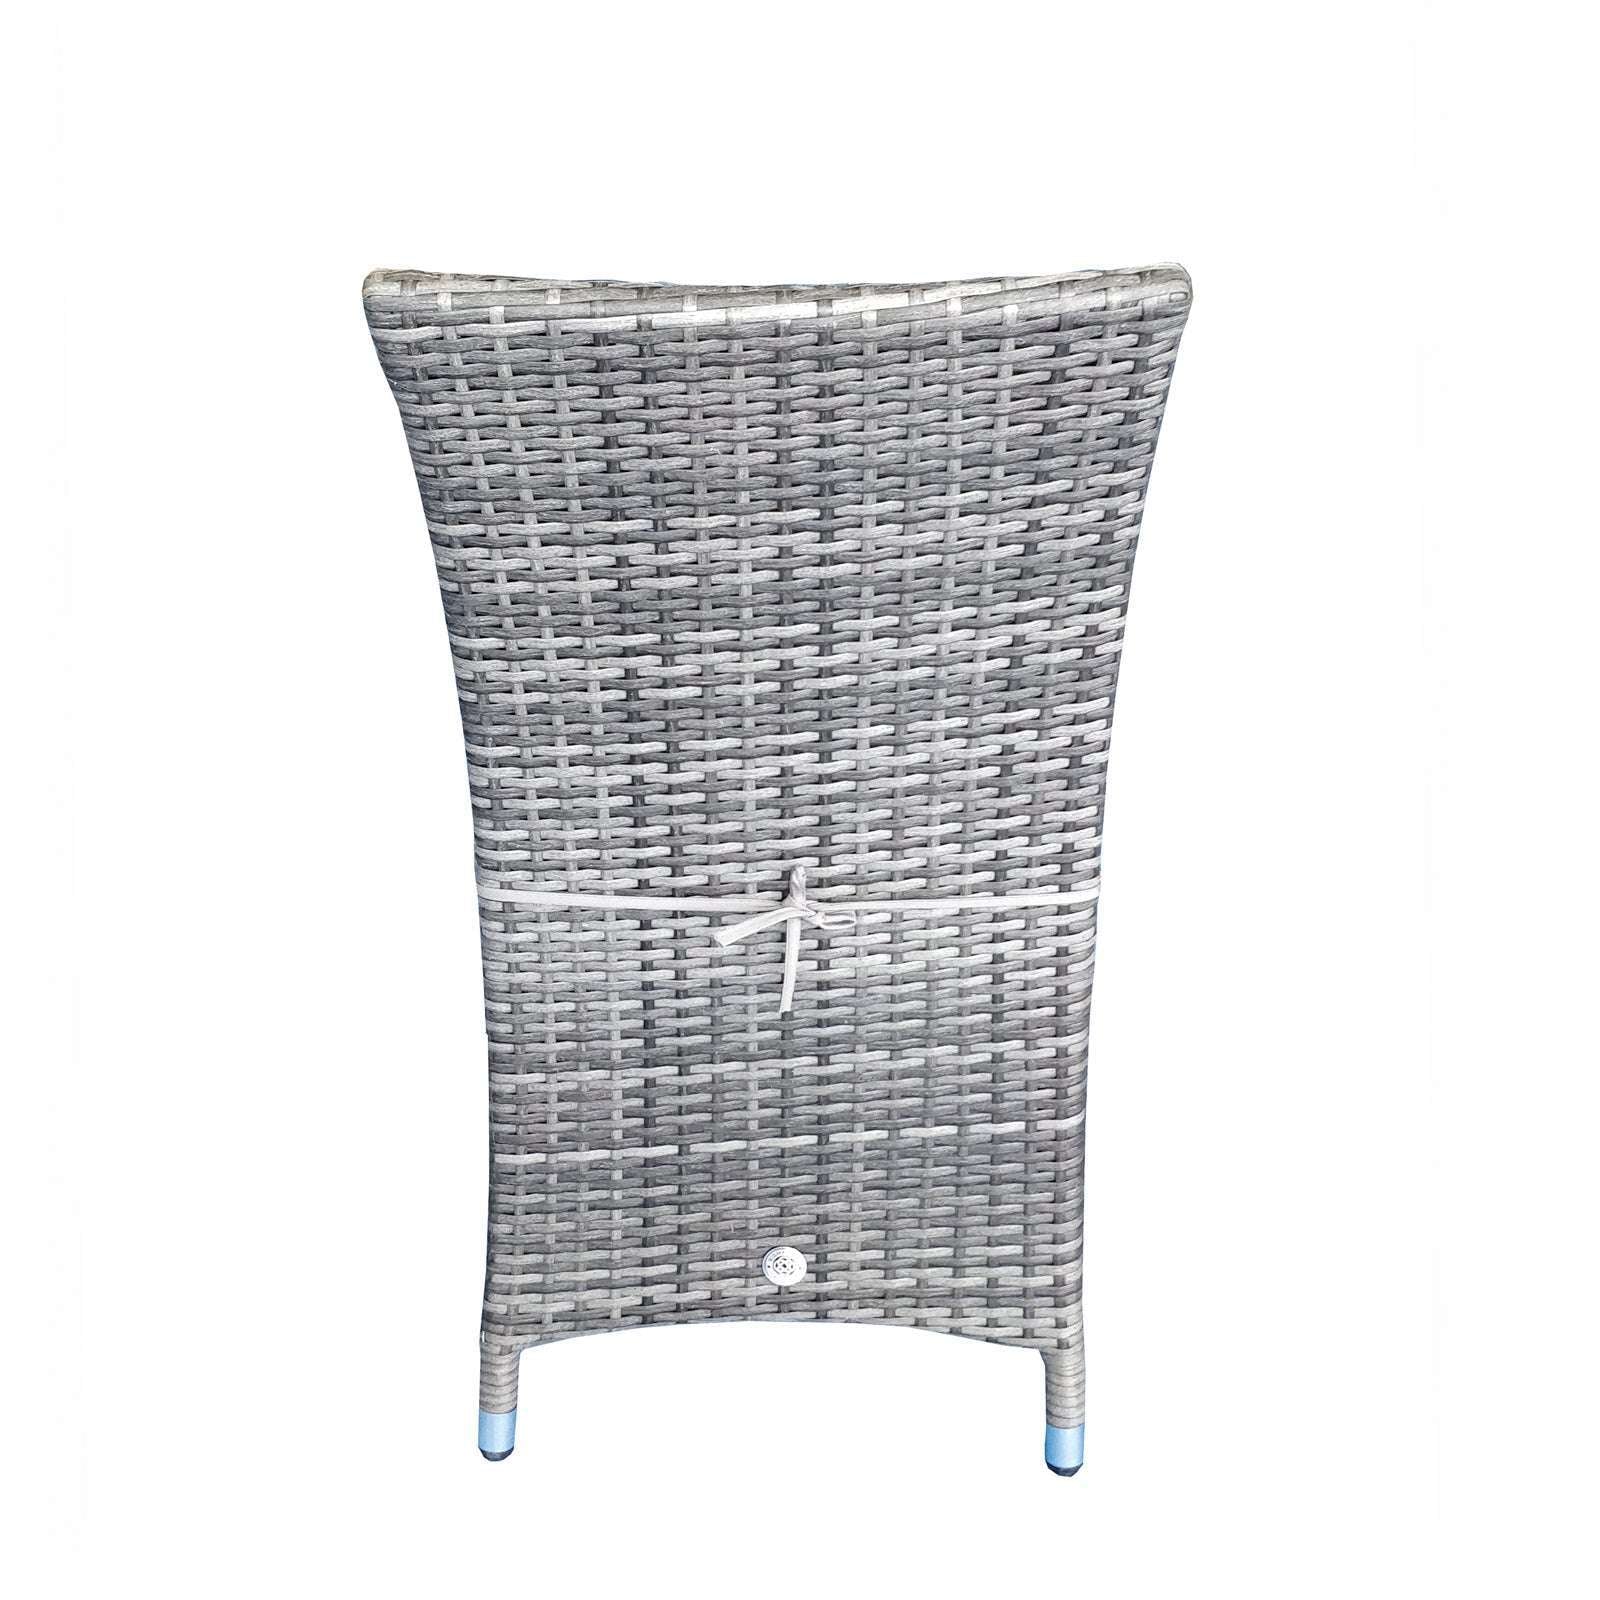 Exceptional Garden:Signature Weave Emily Armless Dining Chairs